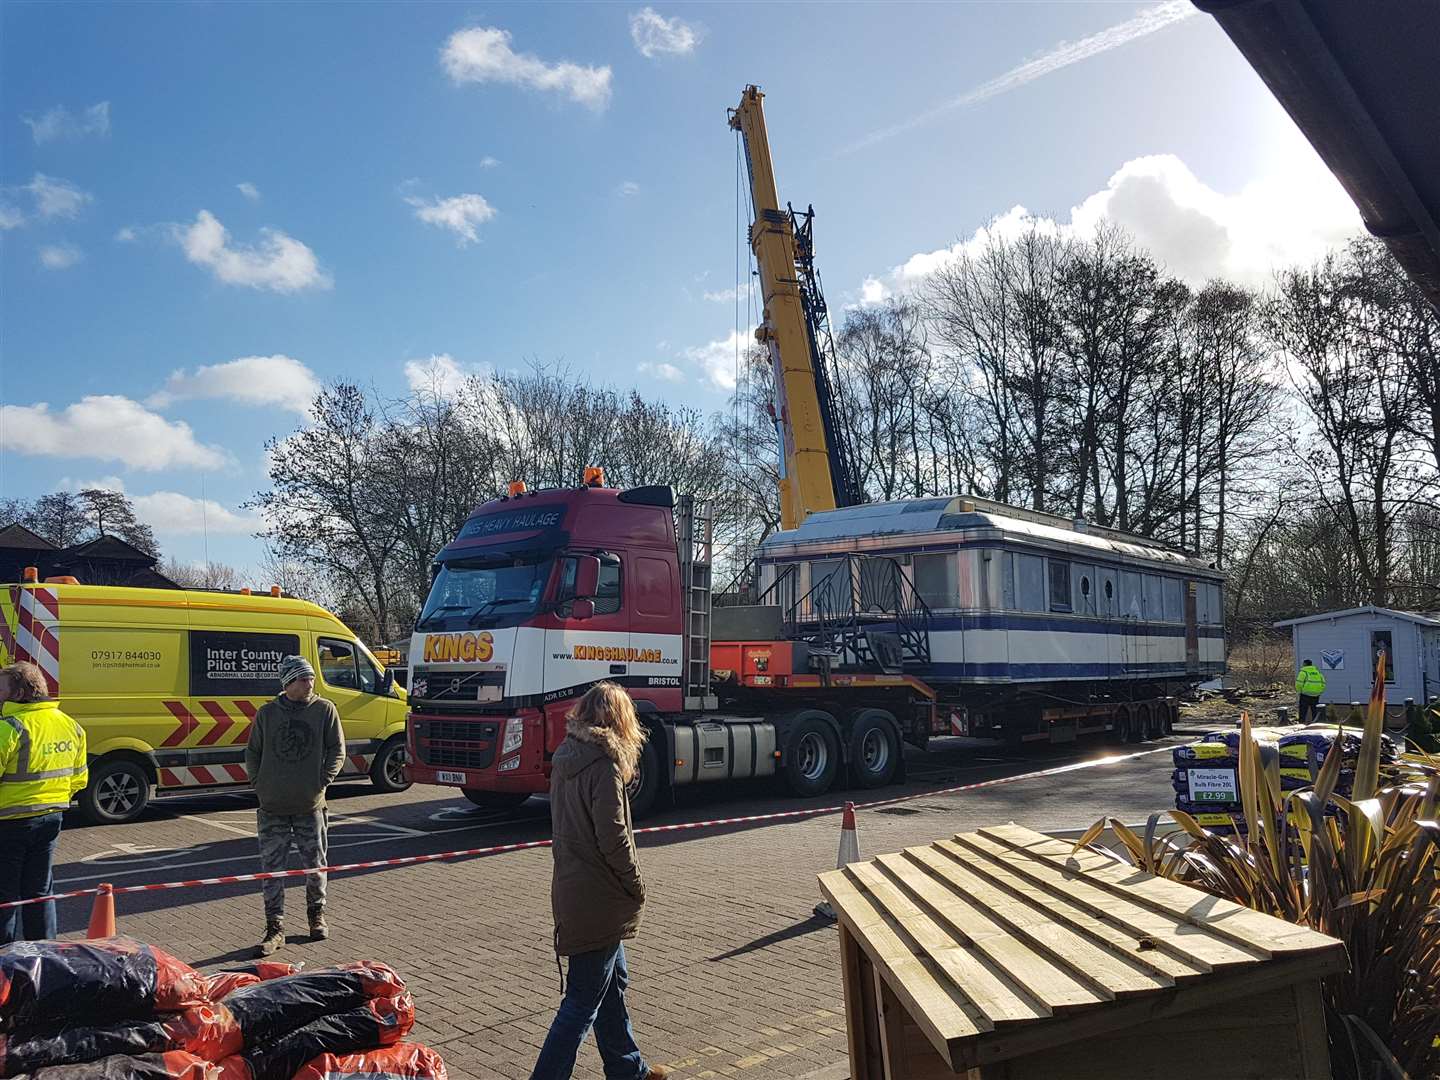 A crane lifted the structure and its base onto lorries before they were hauled away